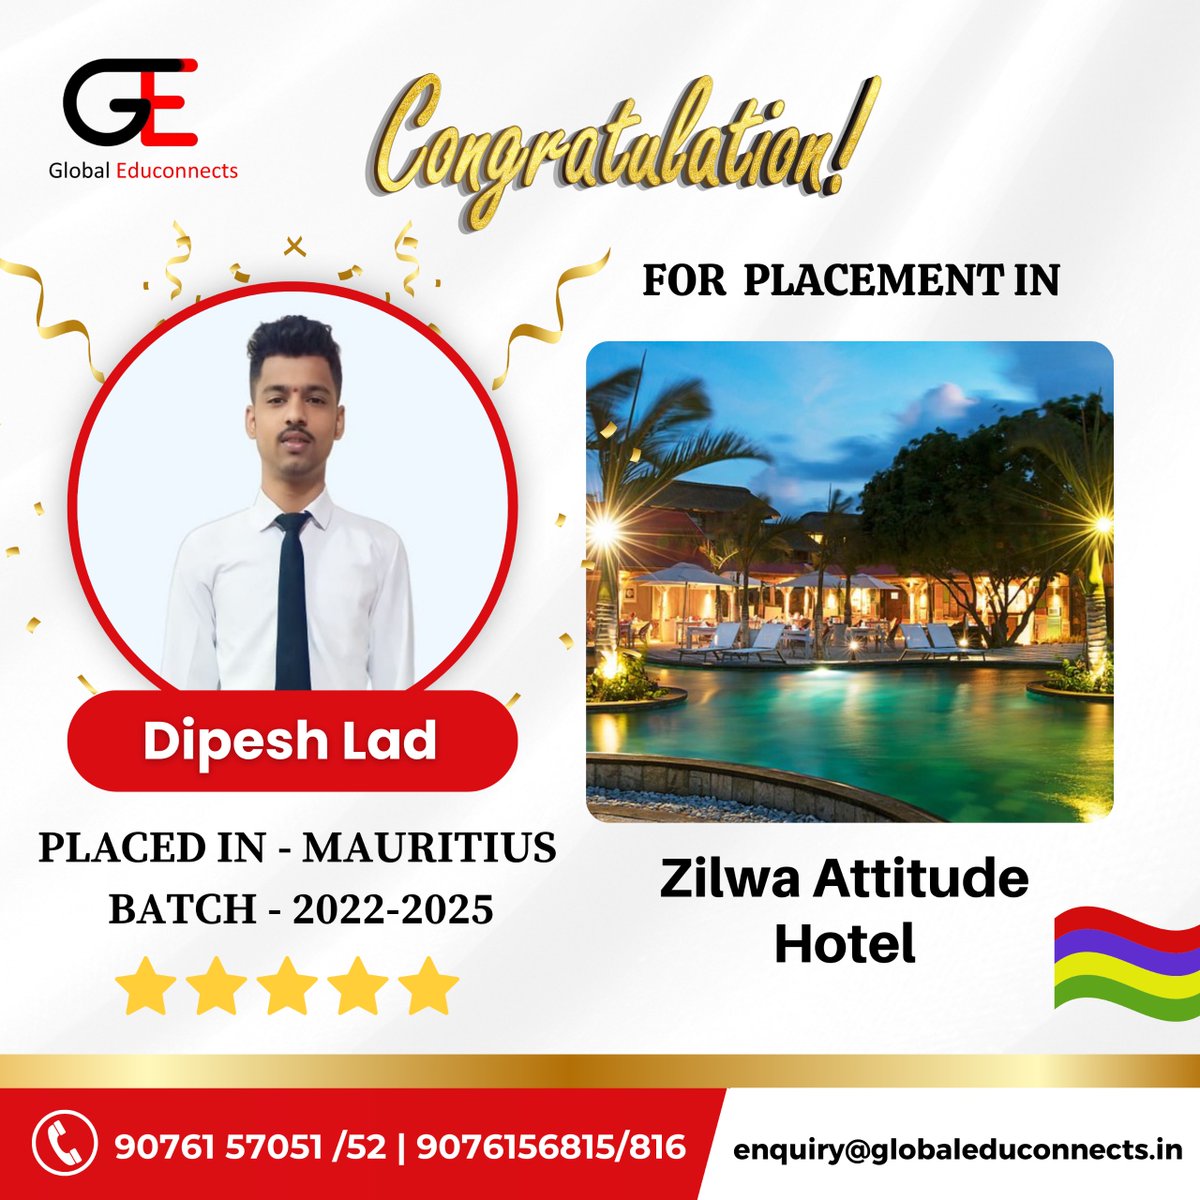 Congratulations!!! @i_am_dip.04 , on successfully getting placed in Mauritius. 
Call Now: +91 90761 57051 / 90761 57052

#placementyear #studyabroad #abroadstudy #mauritius #studyabroadlife #globaleduconencts #hospitalitymanagement #studyinmauritius #studyinmauritius2024